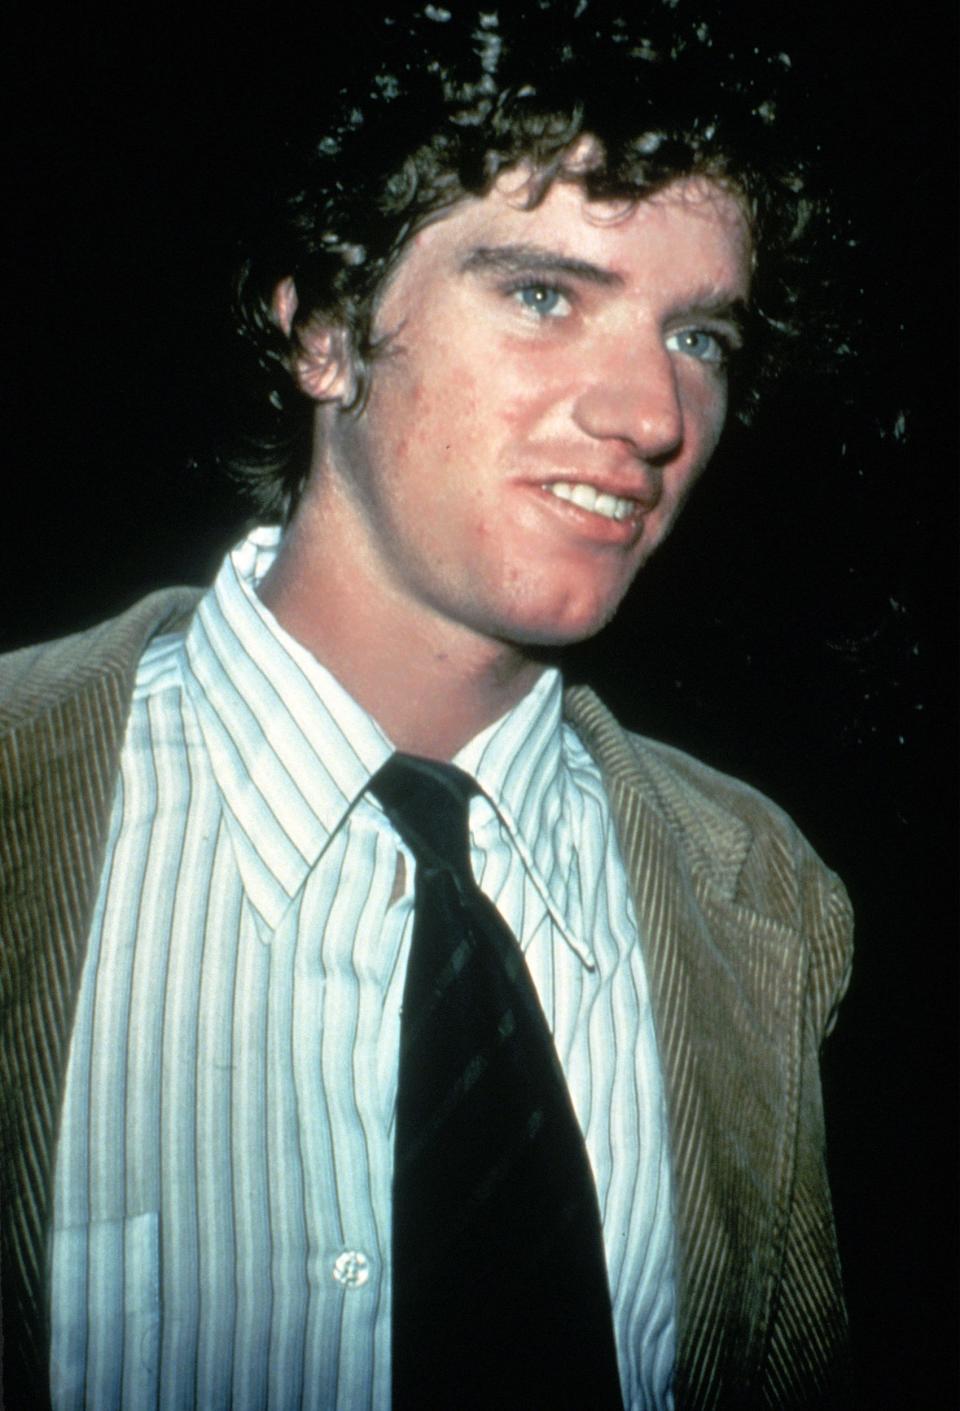 David Kennedy photographed in New York in 1984.